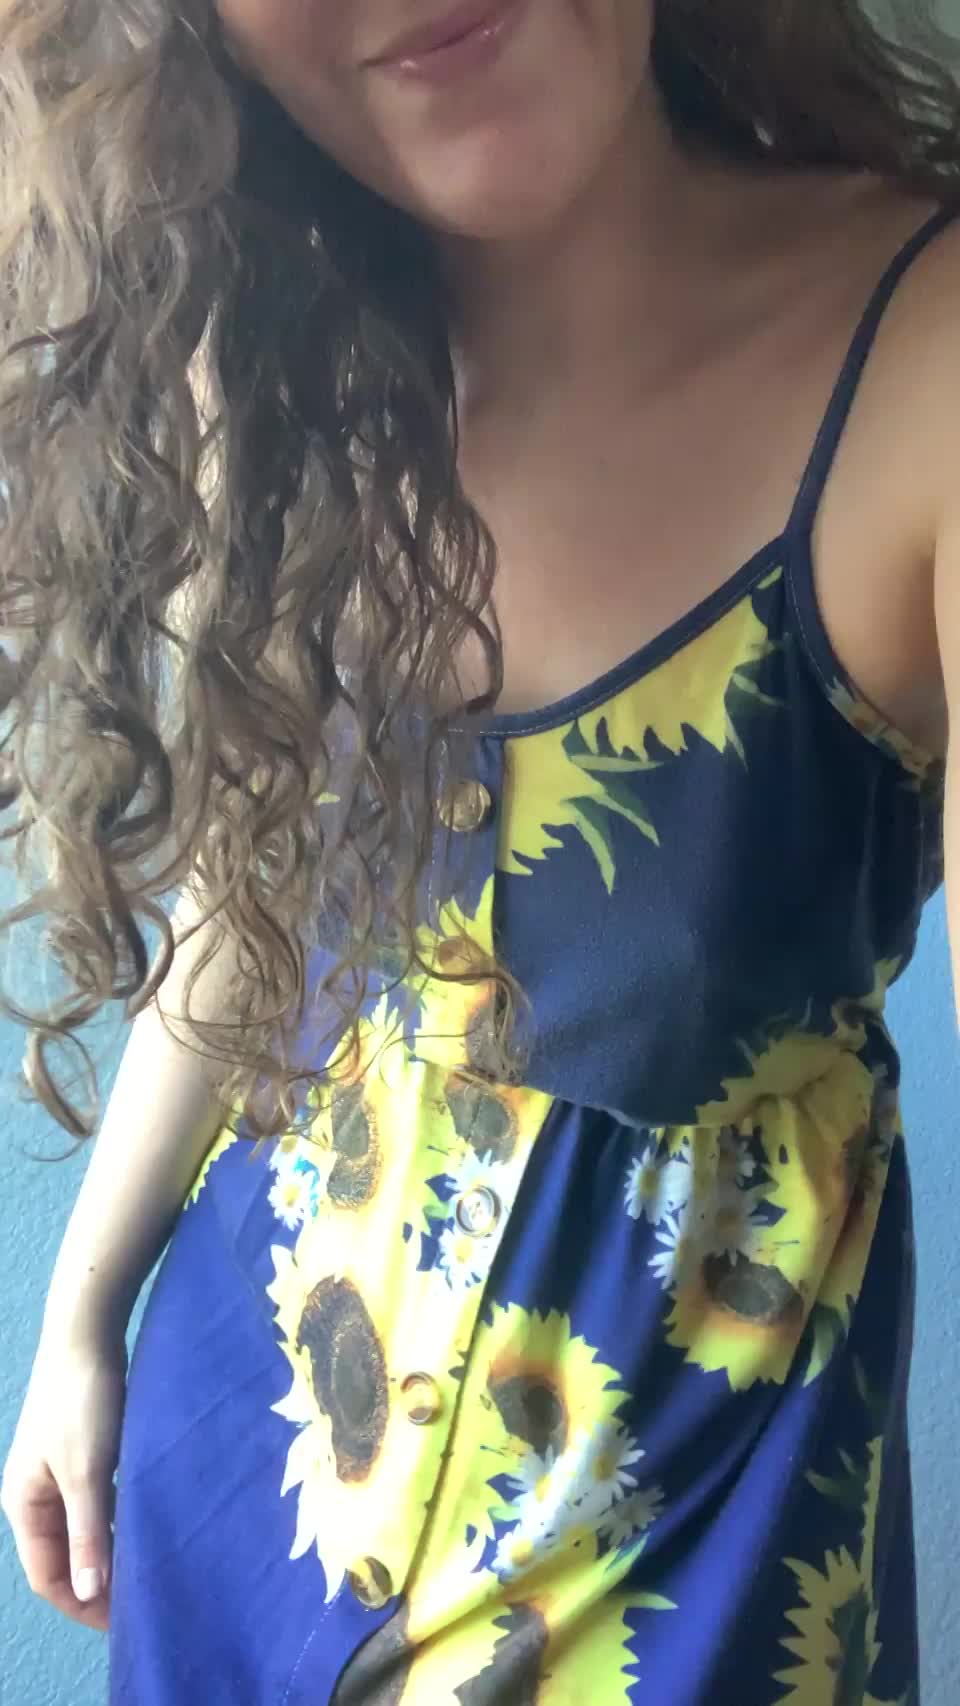 nothing under my sundress season is here 😇 : video clip